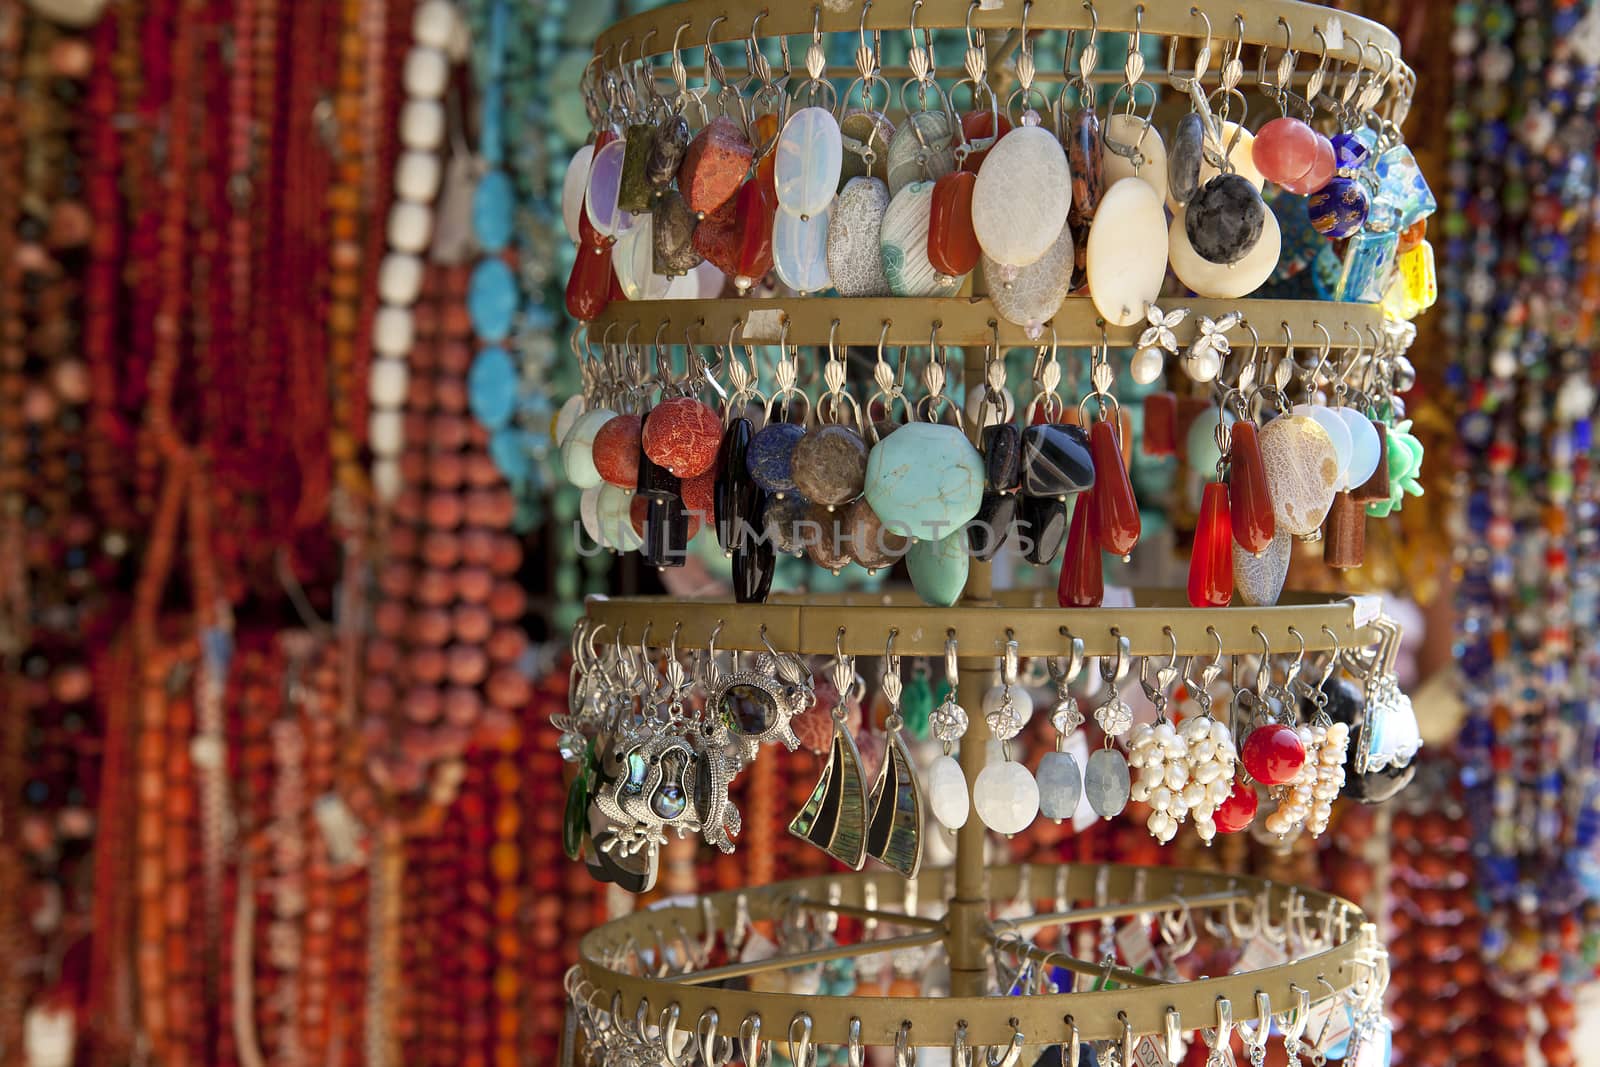 A large number of beads of different colors and shapes for sale.